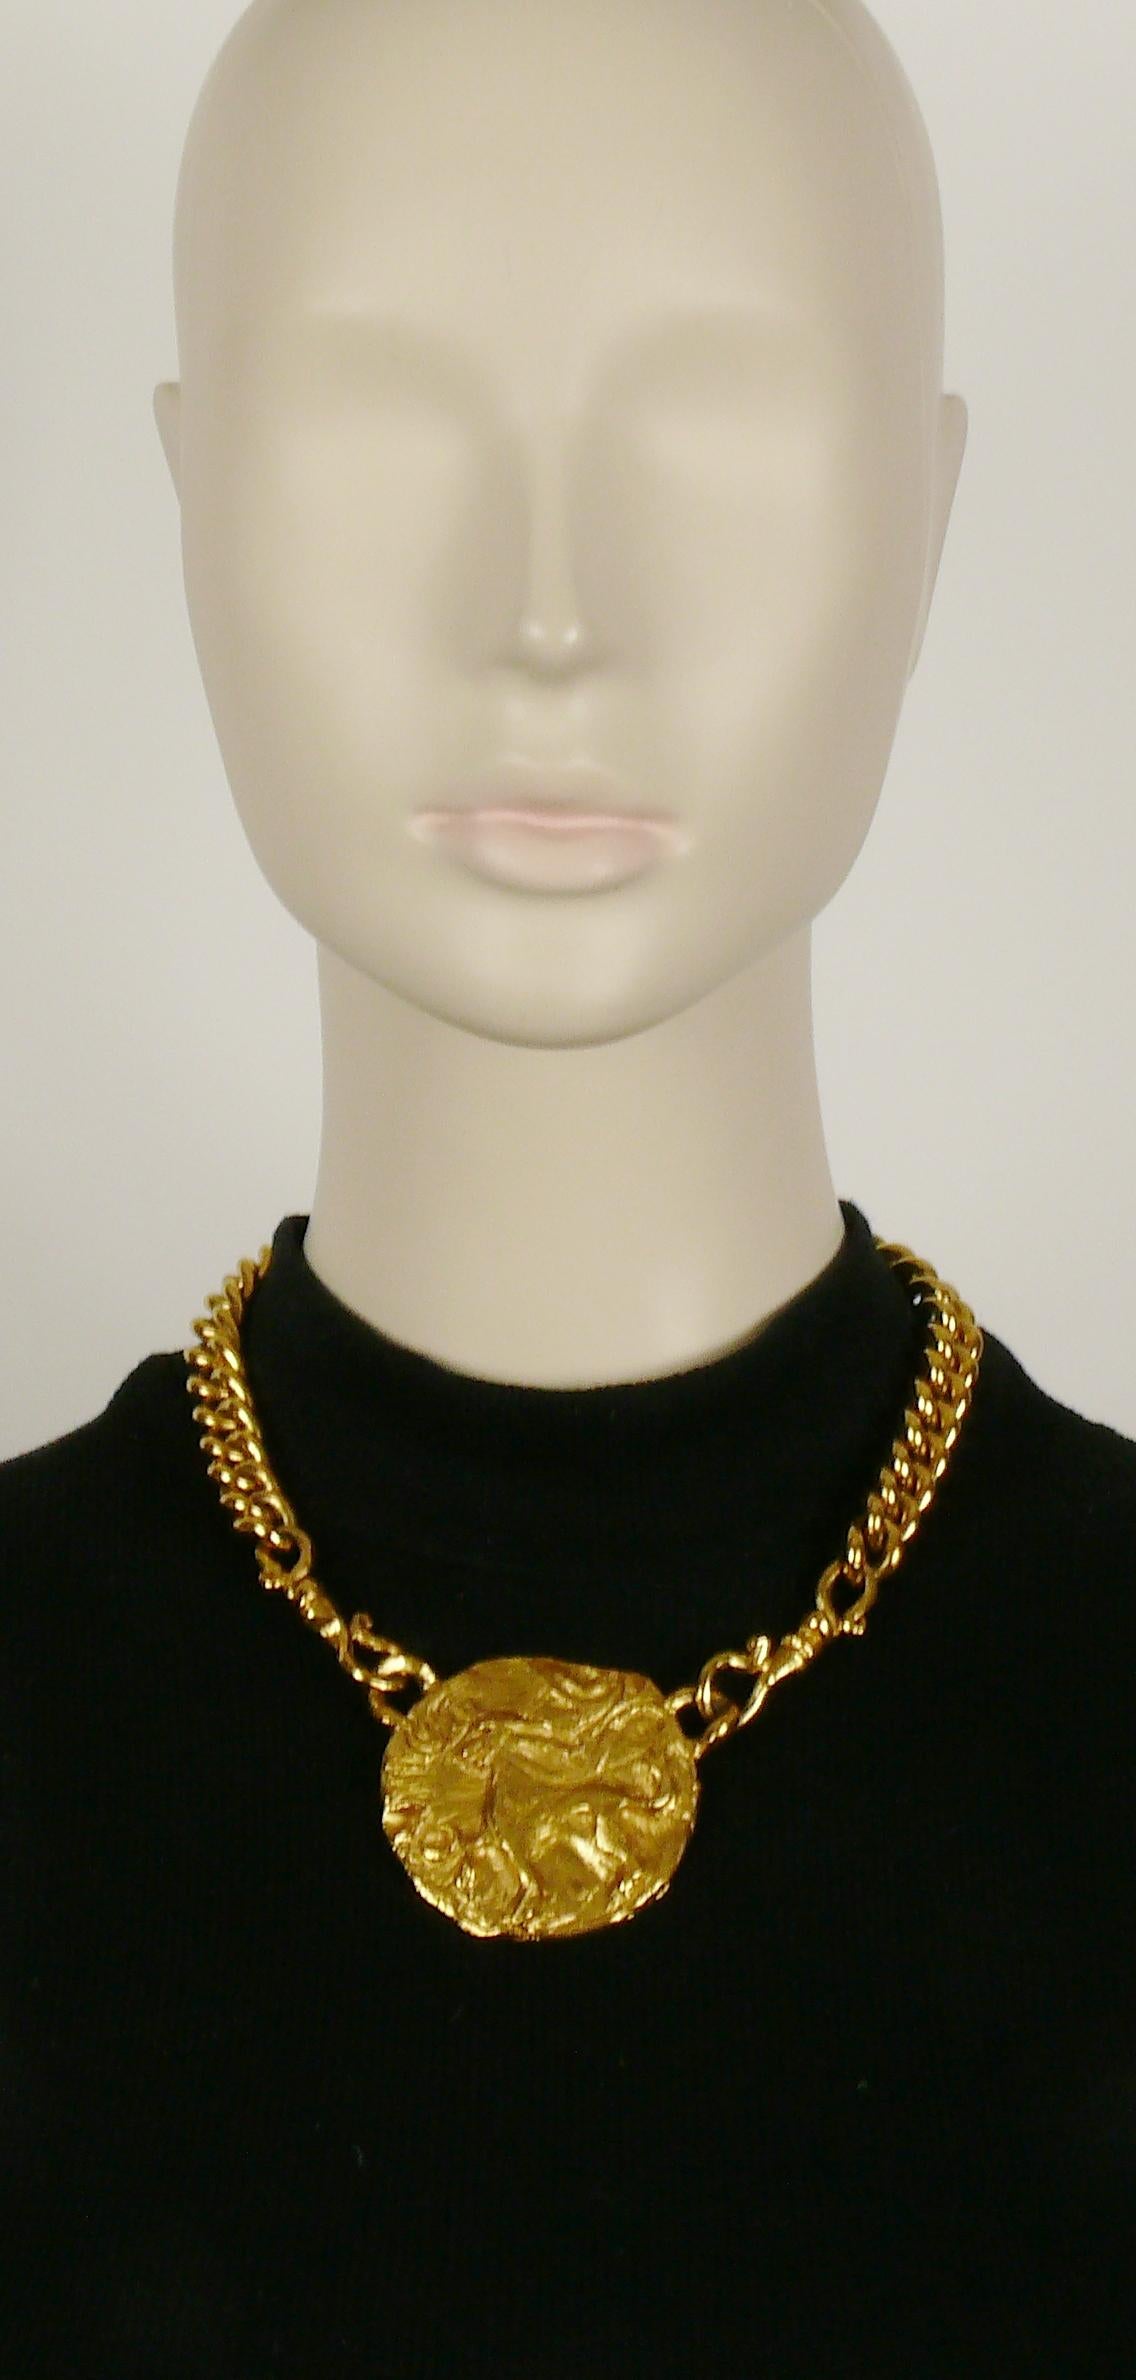 YVES SAINT LAURENT vintage gold toned chunky chain necklace featuring a raised and textured mythological creature medallion.

Toggle and hearts closure with YVES SAINT LAURENT signatures.
Adjustable length.

Embossed YVES SAINT LAURENT on the heart